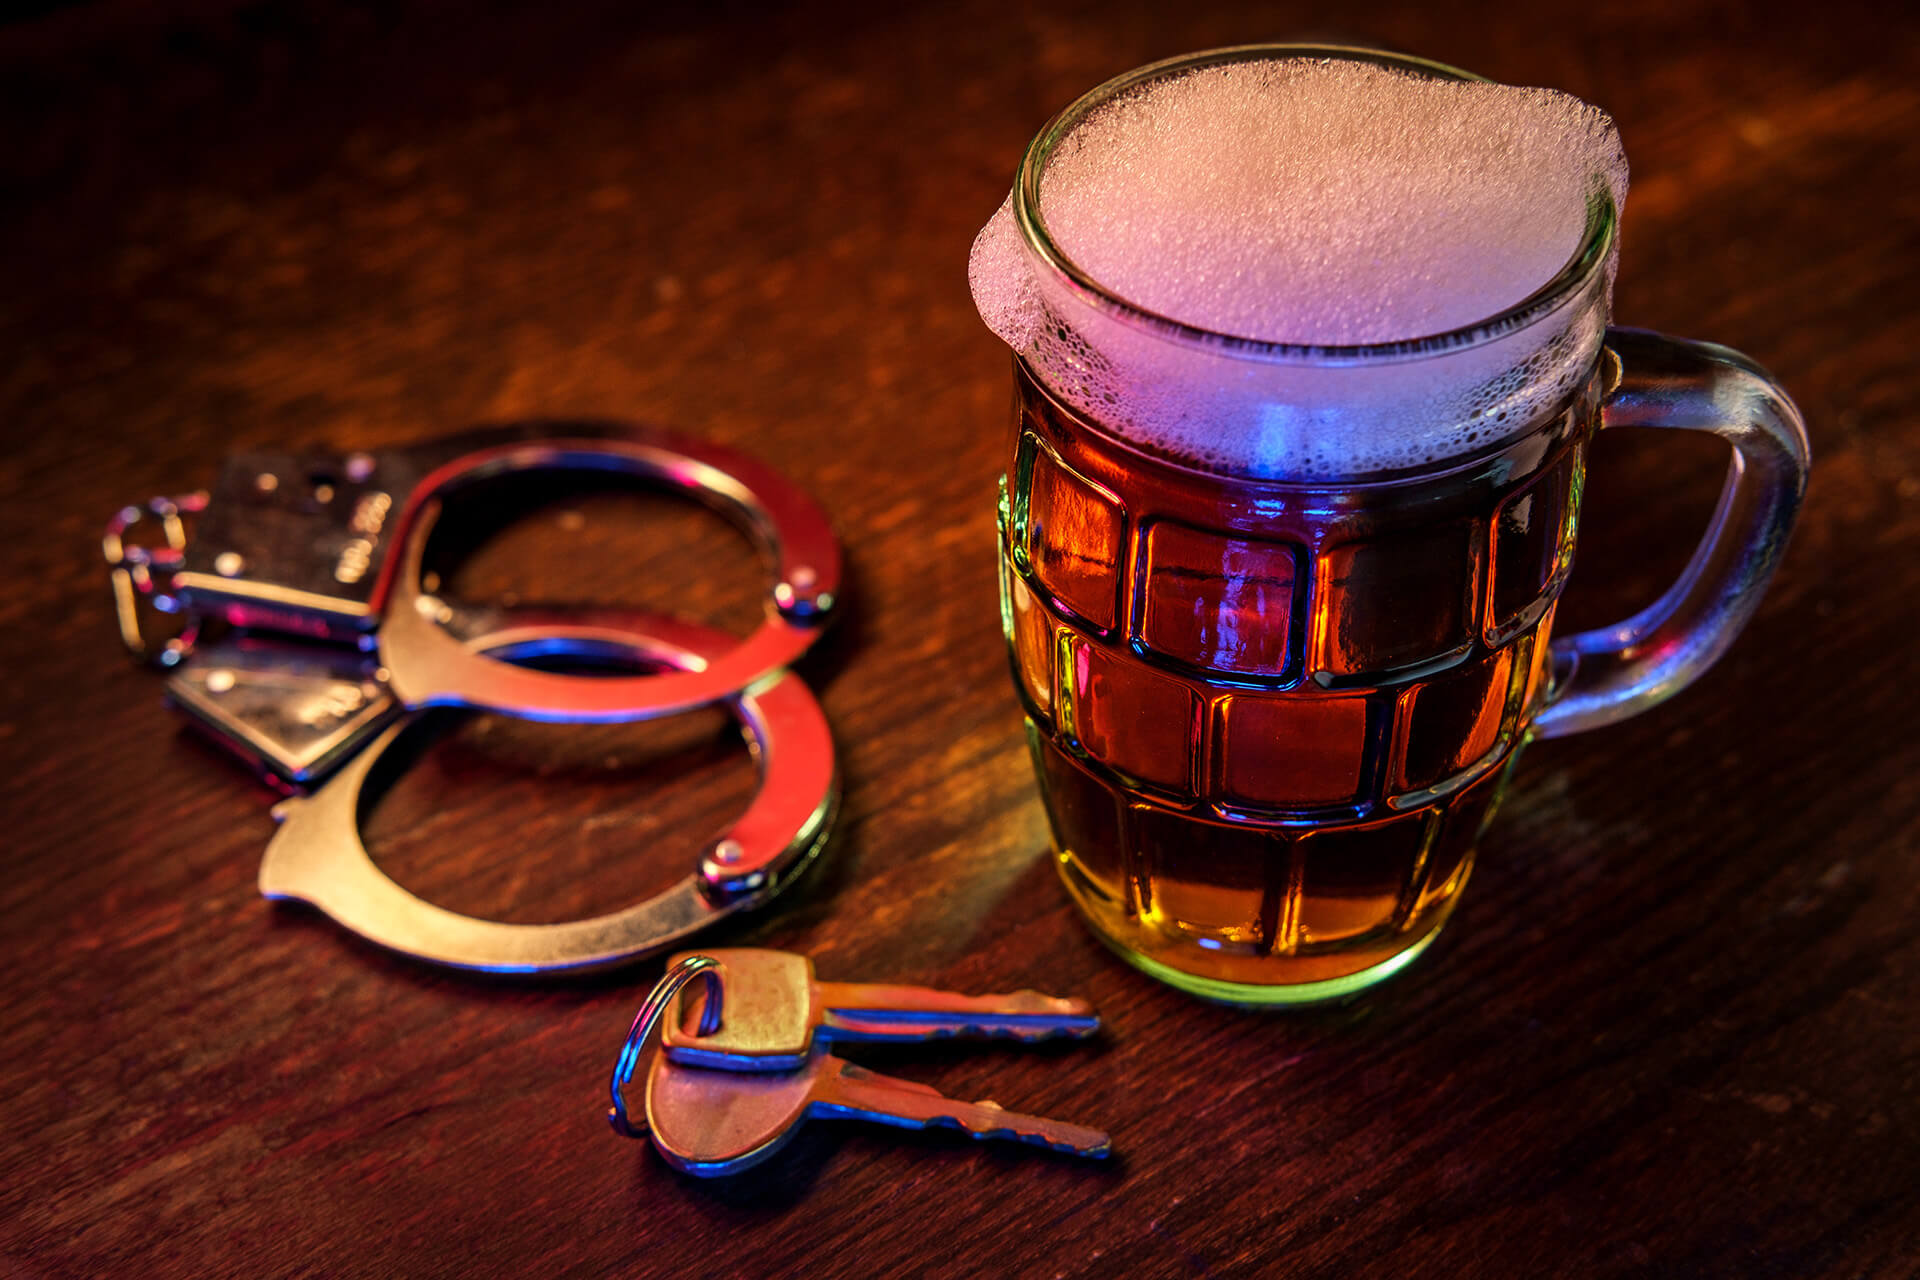 Deferred Adjudication for First-Time Drunk Drivers in Texas?